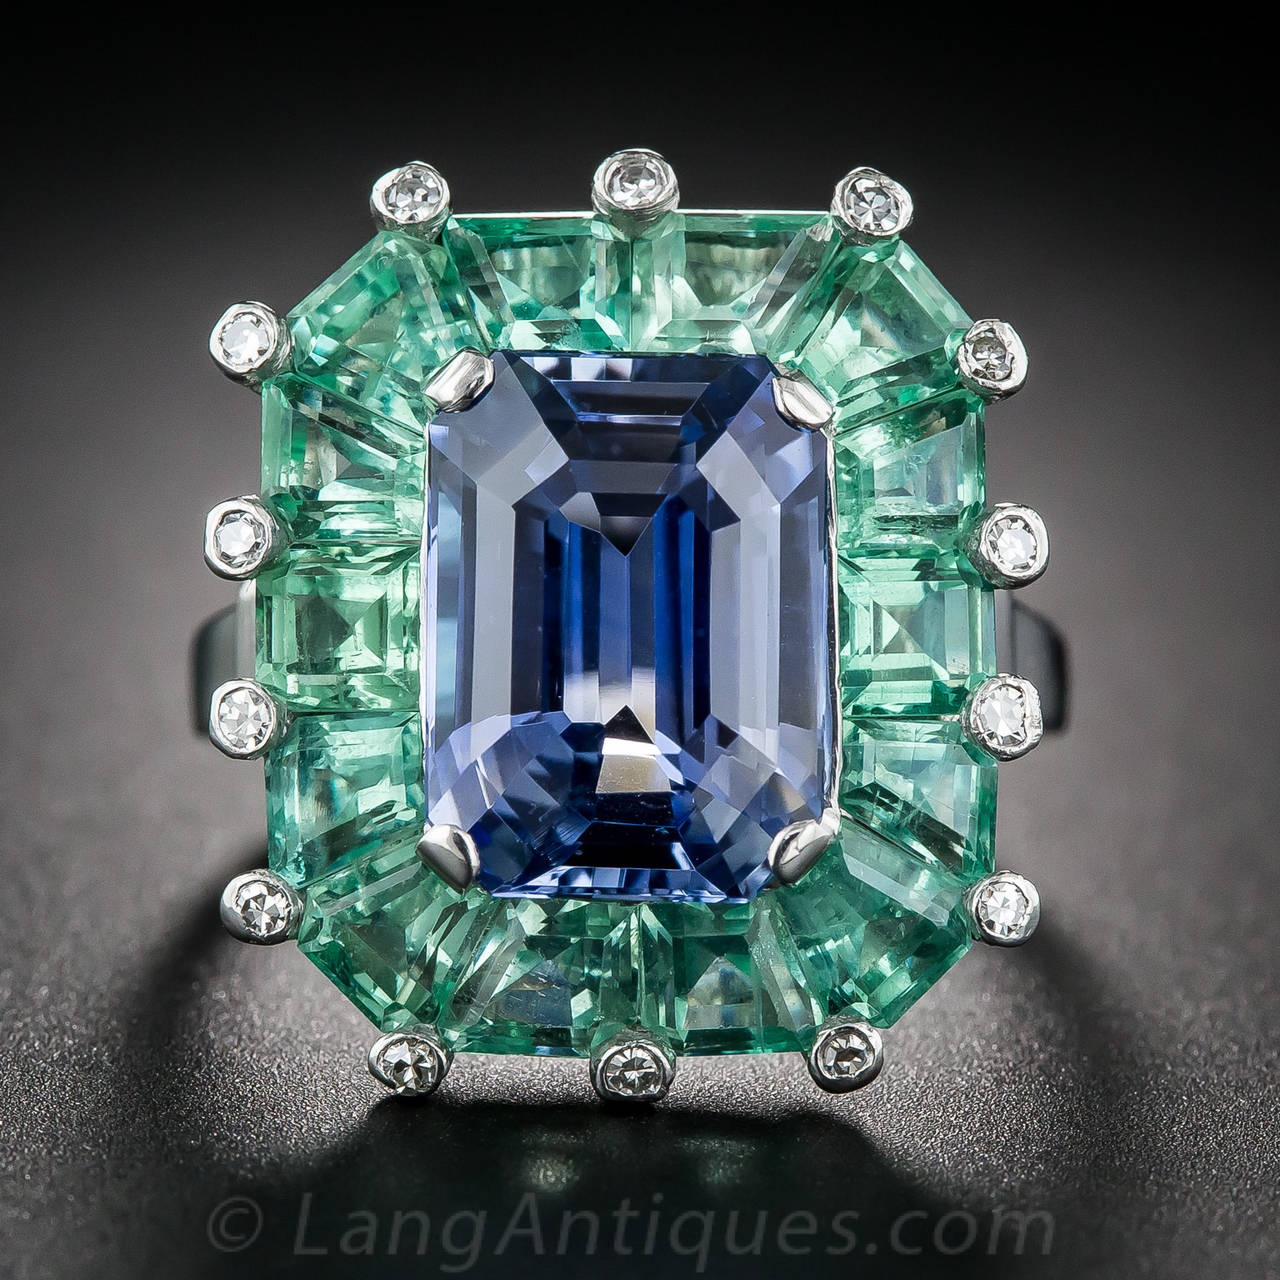 Unique, chic and magnifique! This intriguingly gorgeous vintage jewel, hand fabricated in platinum, circa 1930s-40s, highlights a sumptuous Ceylon blue emerald-cut sapphire, weighing 5.68 carats, bearing an AGL gemstone report stating: No